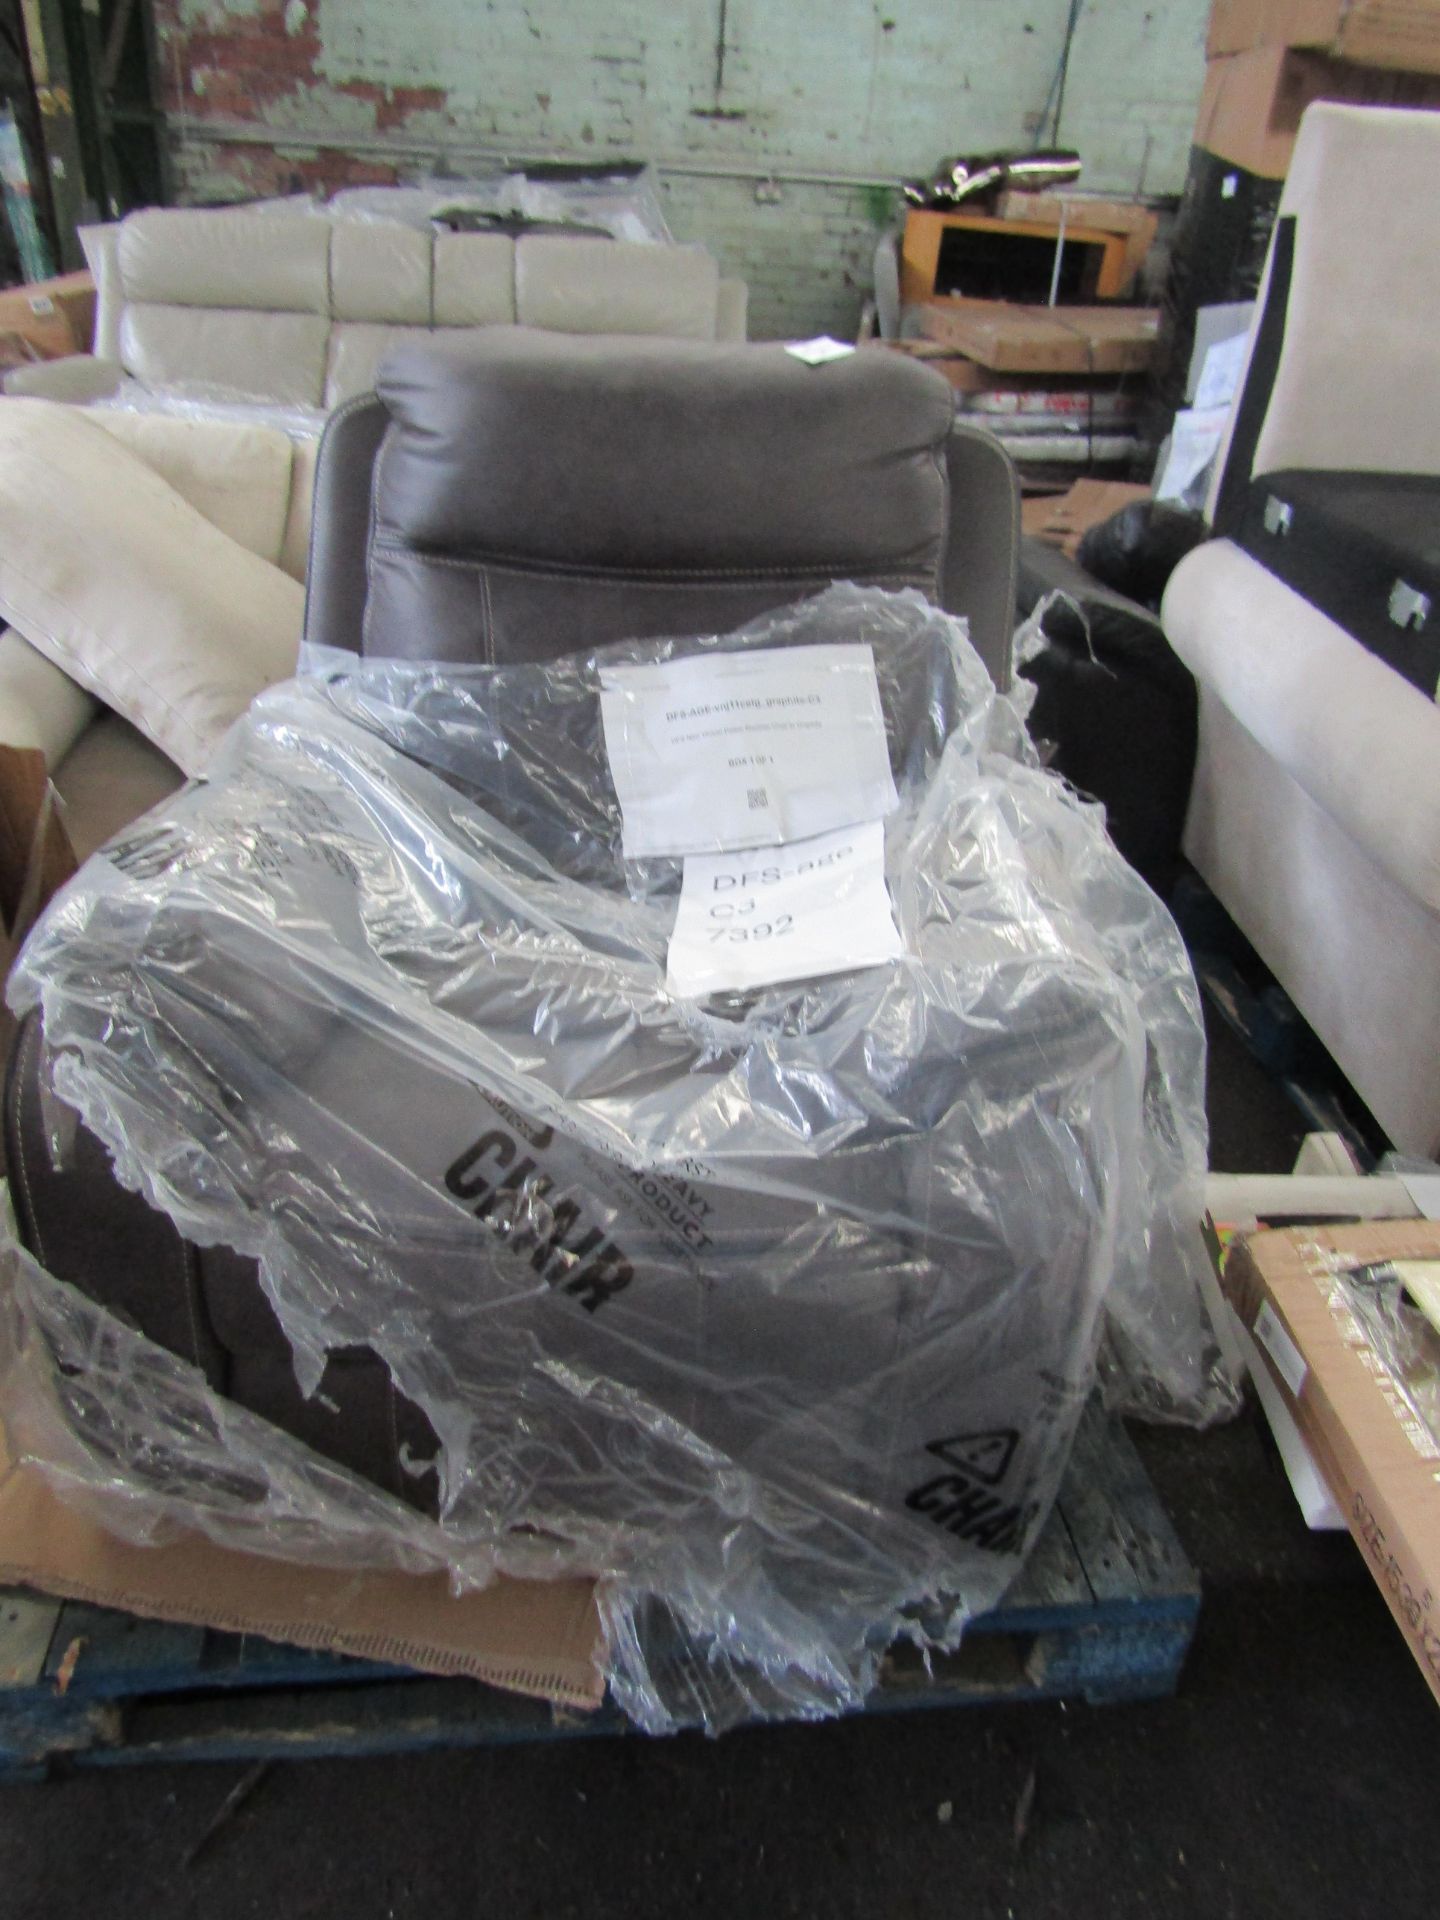 DFS New Vinson Power Recliner Chair In Graphite RRP 949About the Product(s) A cozy power recliner